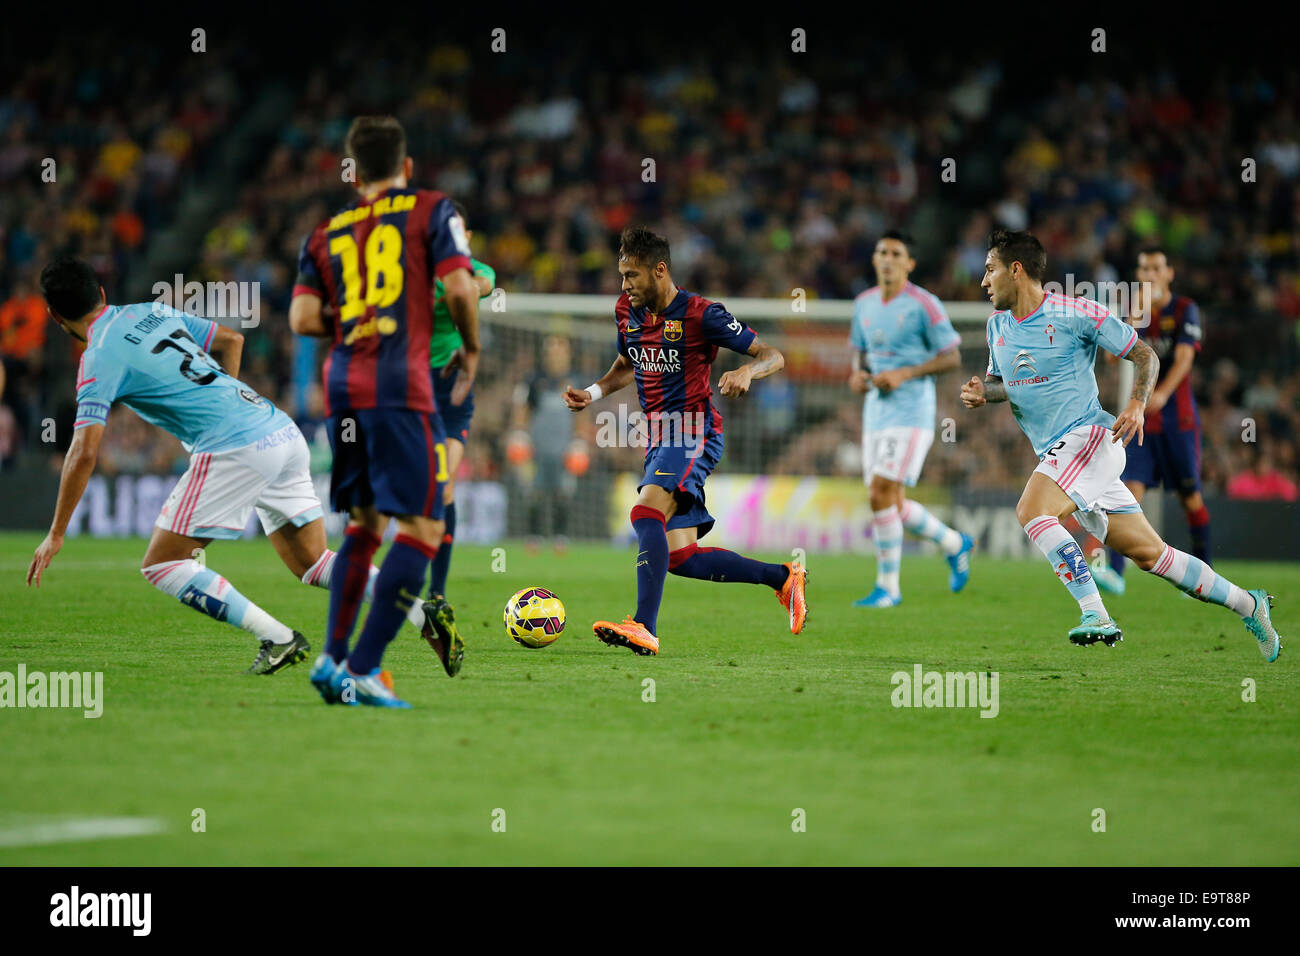 Barcelona, Spain. 1st Nov, 2014. Neymar (C) of Barcelona competes during the Spanish first division soccer match against Celta Vigo at the Camp Nou stadium in Barcelona, Spain, Nov. 1, 2014. Barcelona lost 0-1. Credit:  Pau Barrena/Xinhua/Alamy Live News Stock Photo